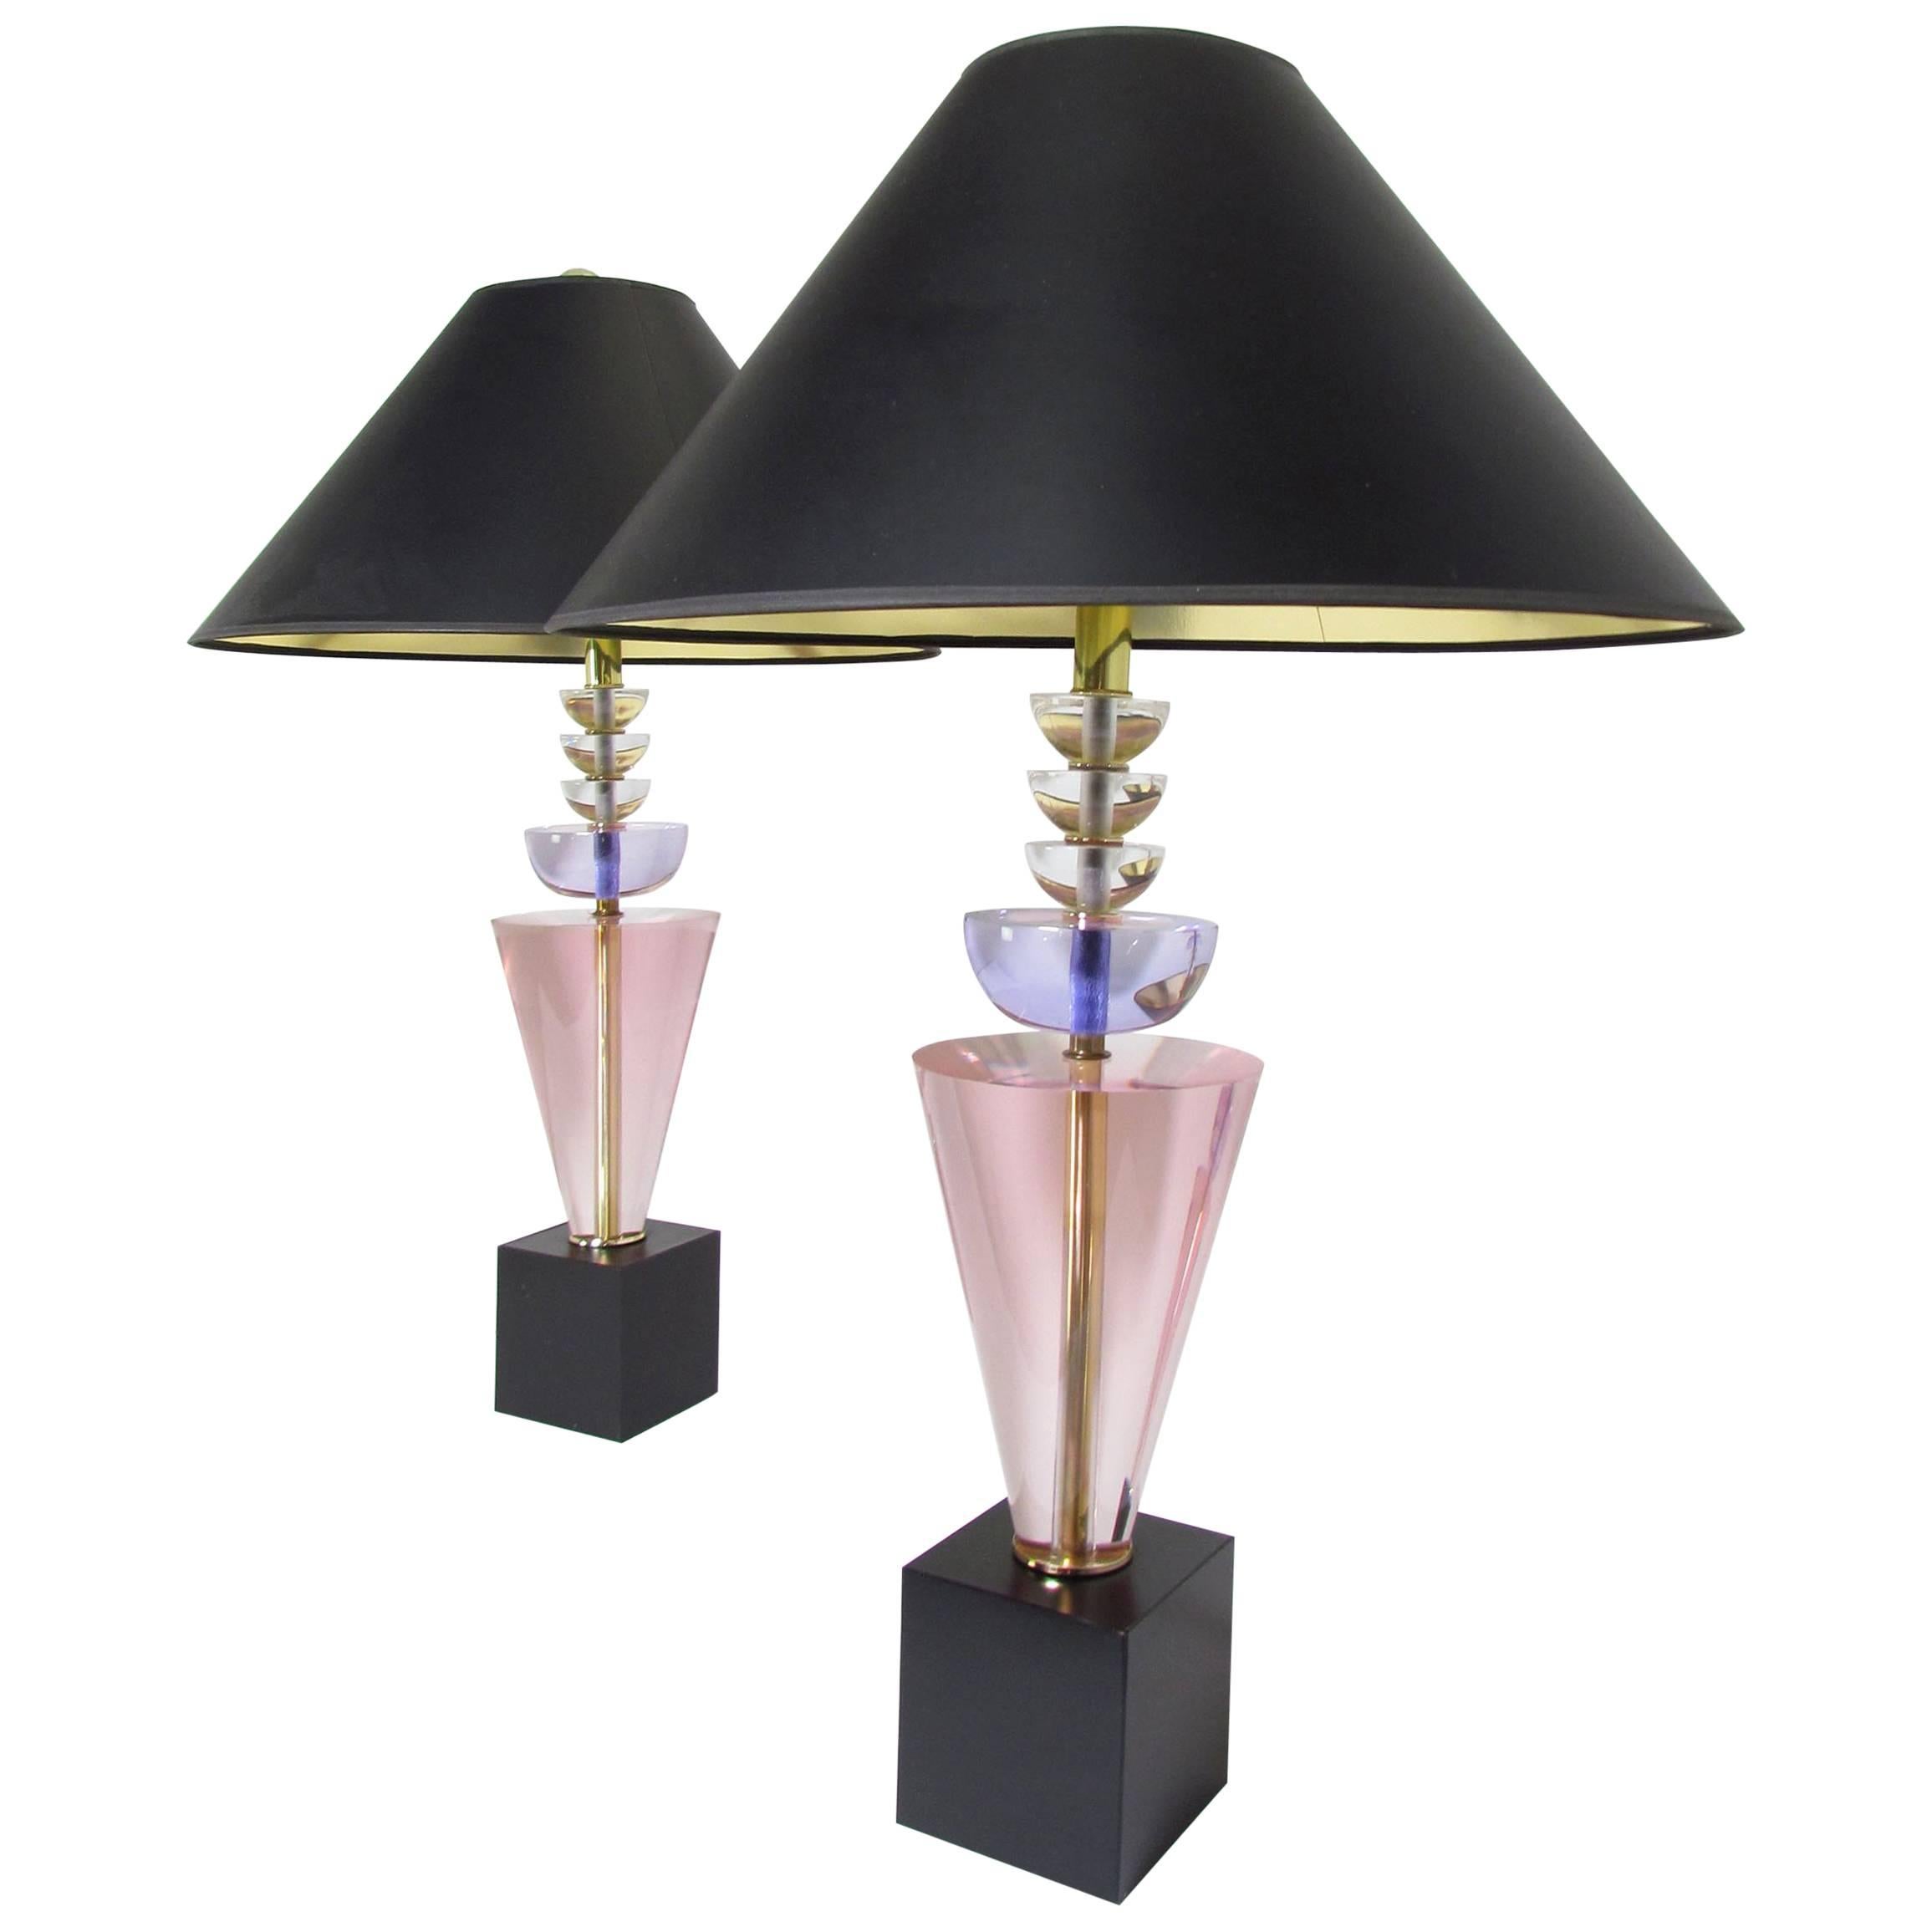 Pair of Lucite Table Lamps by Van Teal, circa 1970s